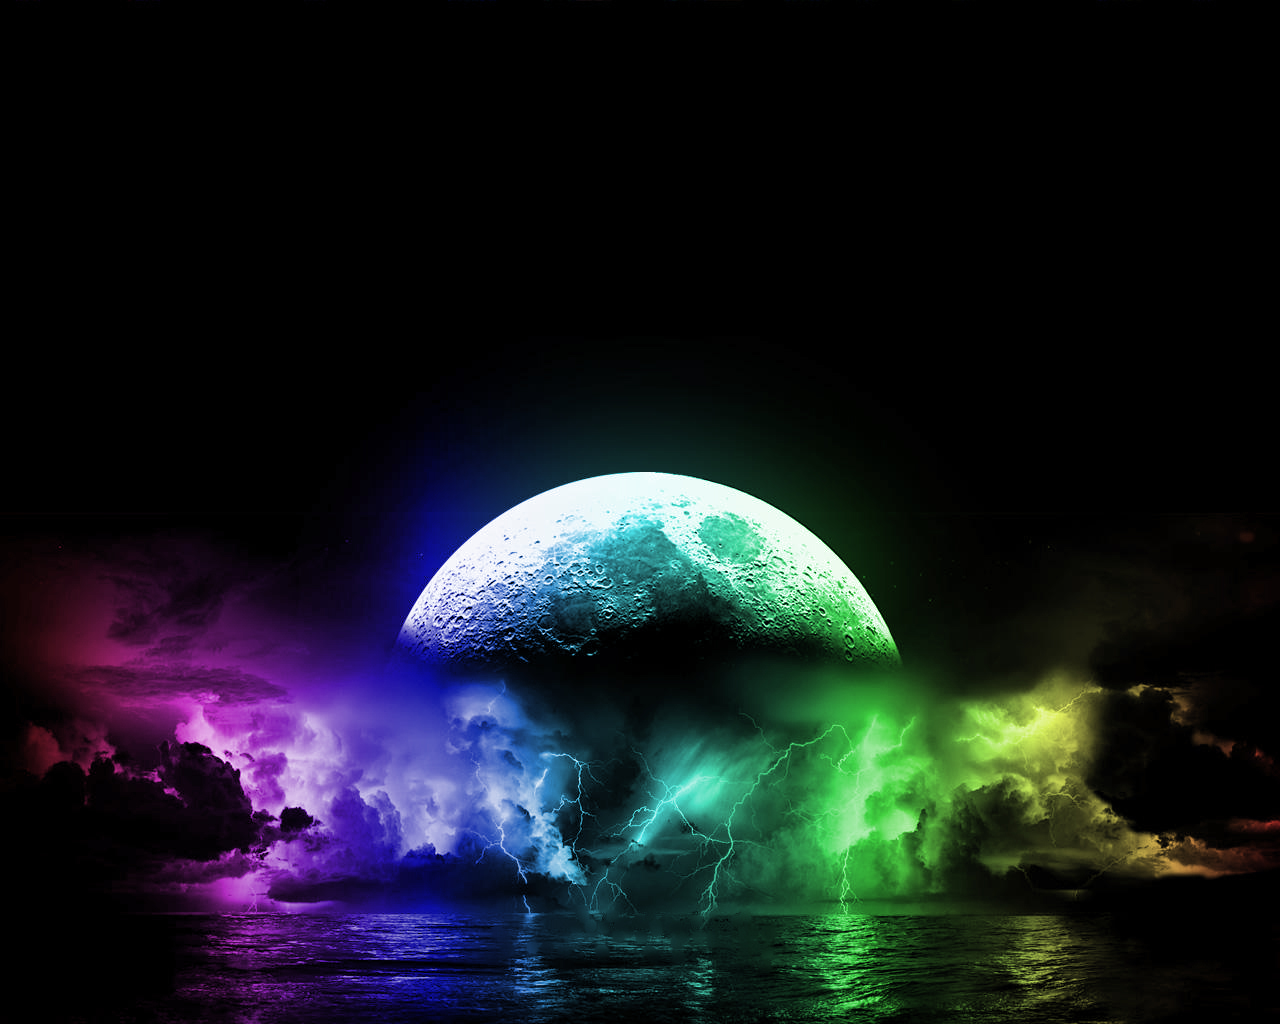 Cool wallpaper download wallpaper A really cool and colorful moon 1280x1024